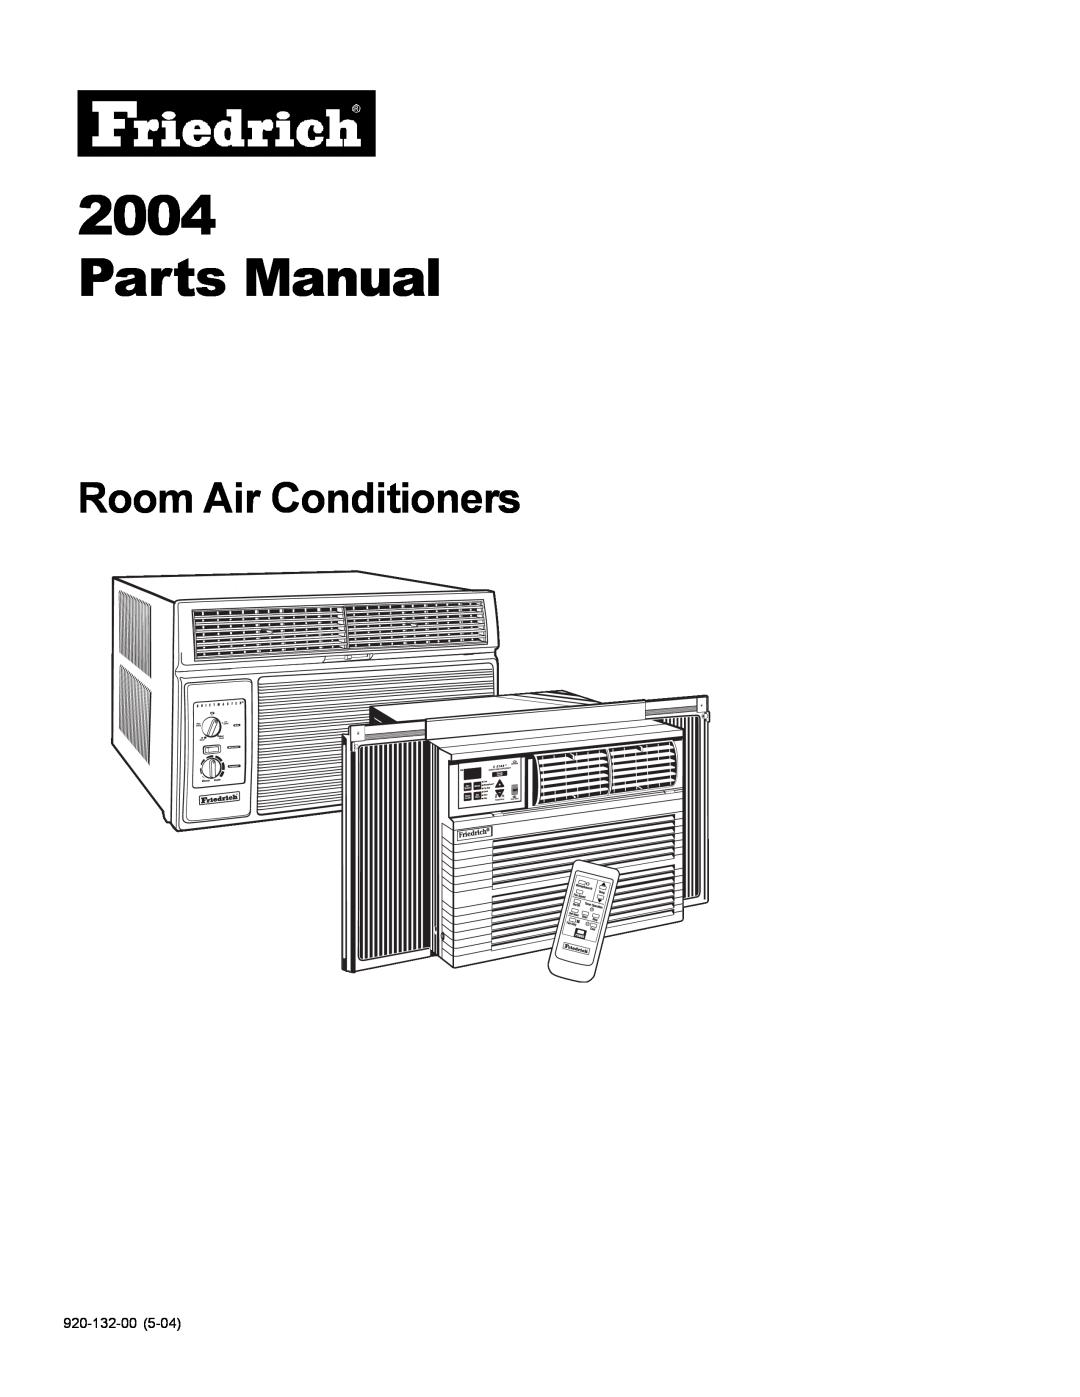 Friedrich 2004 manual Parts Manual, Room Air Conditioners 